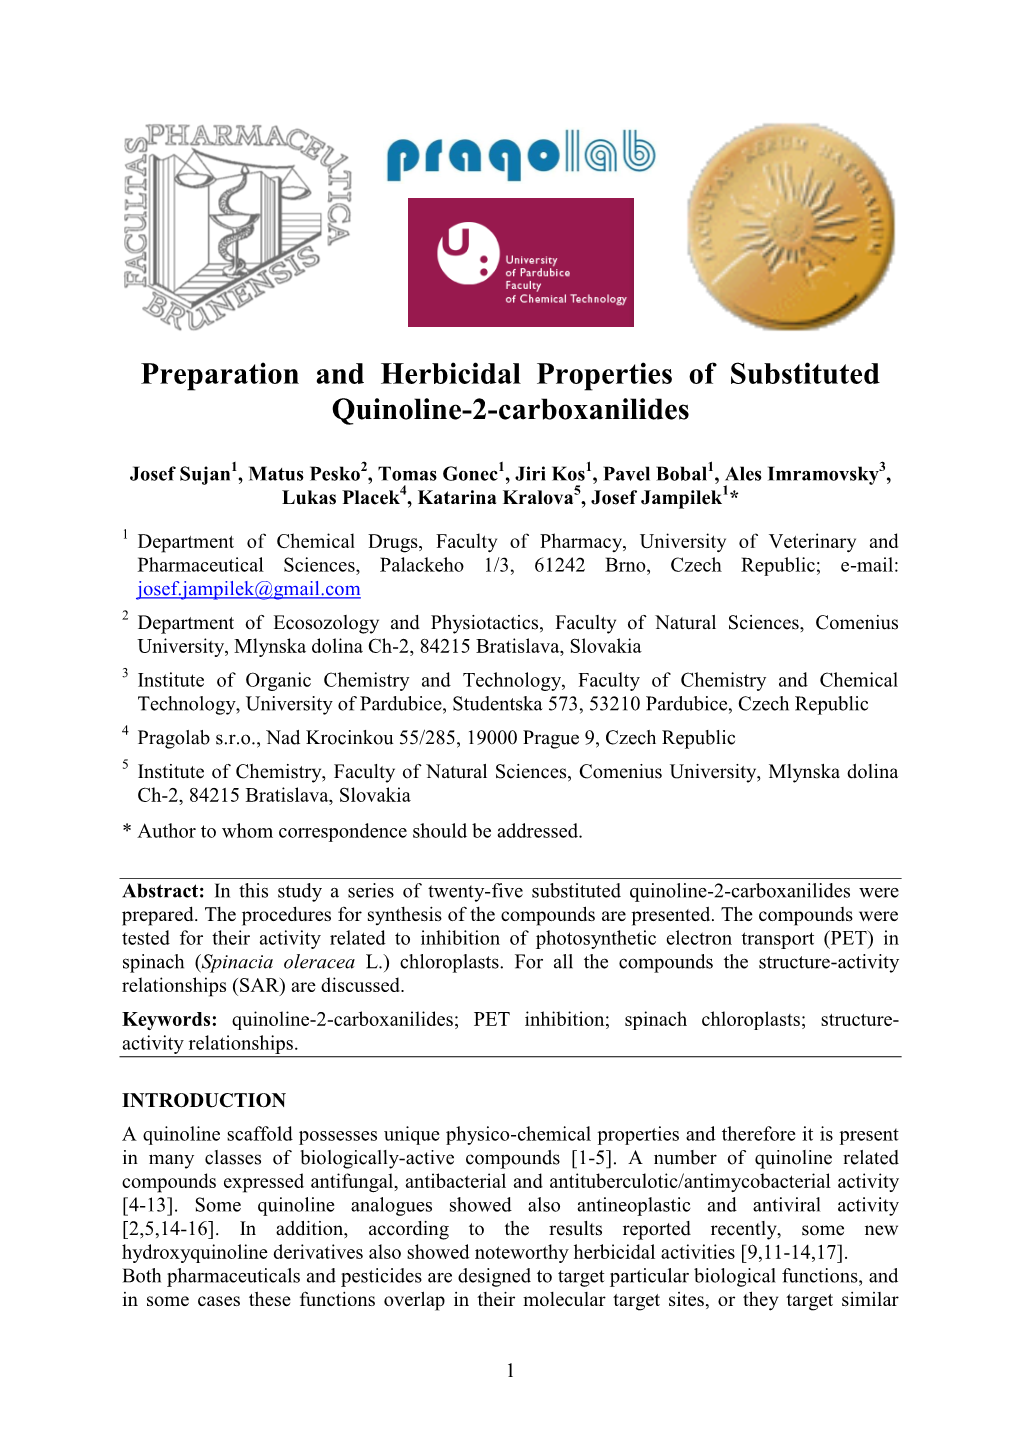 Preparation and Herbicidal Properties of Substituted Quinoline-2-Carboxanilides